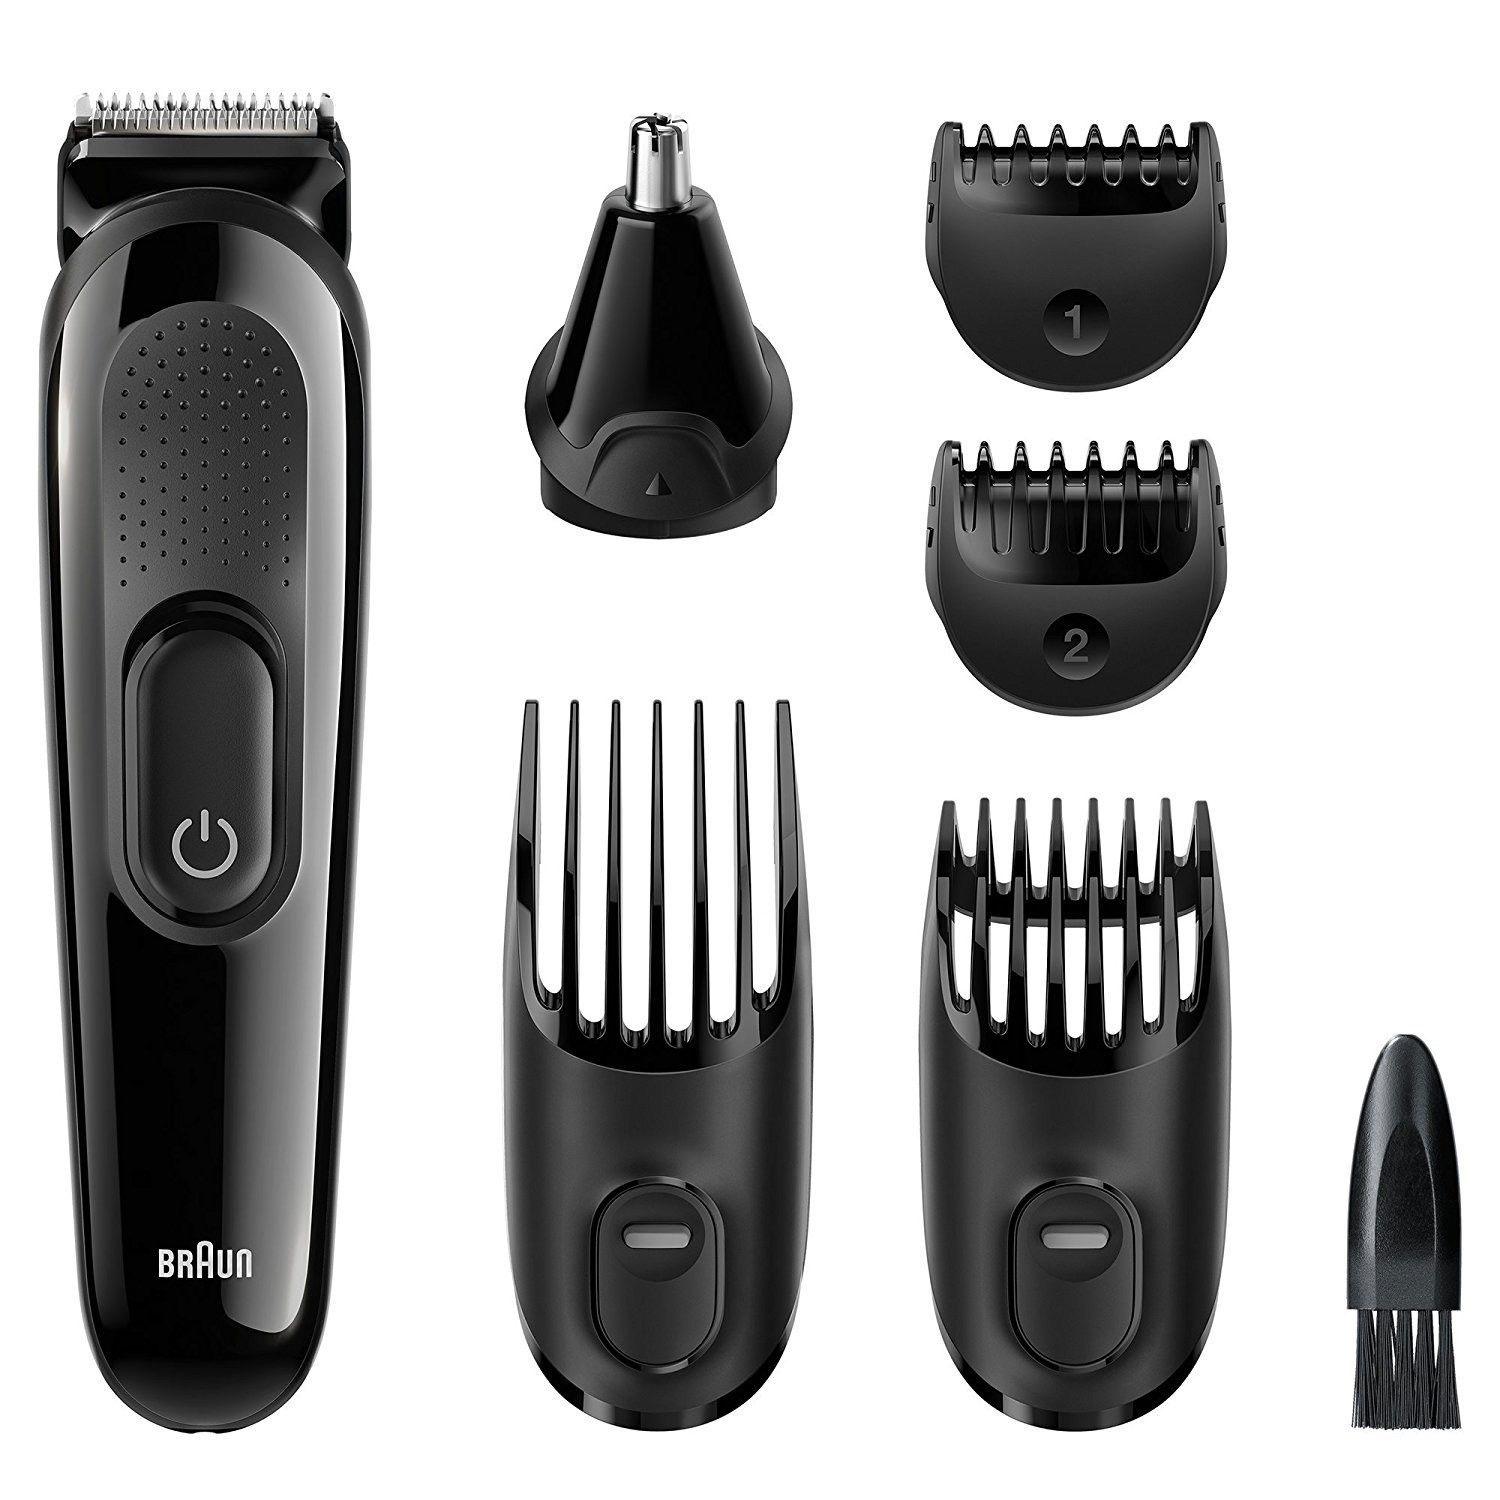 Braun 6-in-1 Styling Multi-Grooming Kit £20.99 - Free Delivery | MyMemory